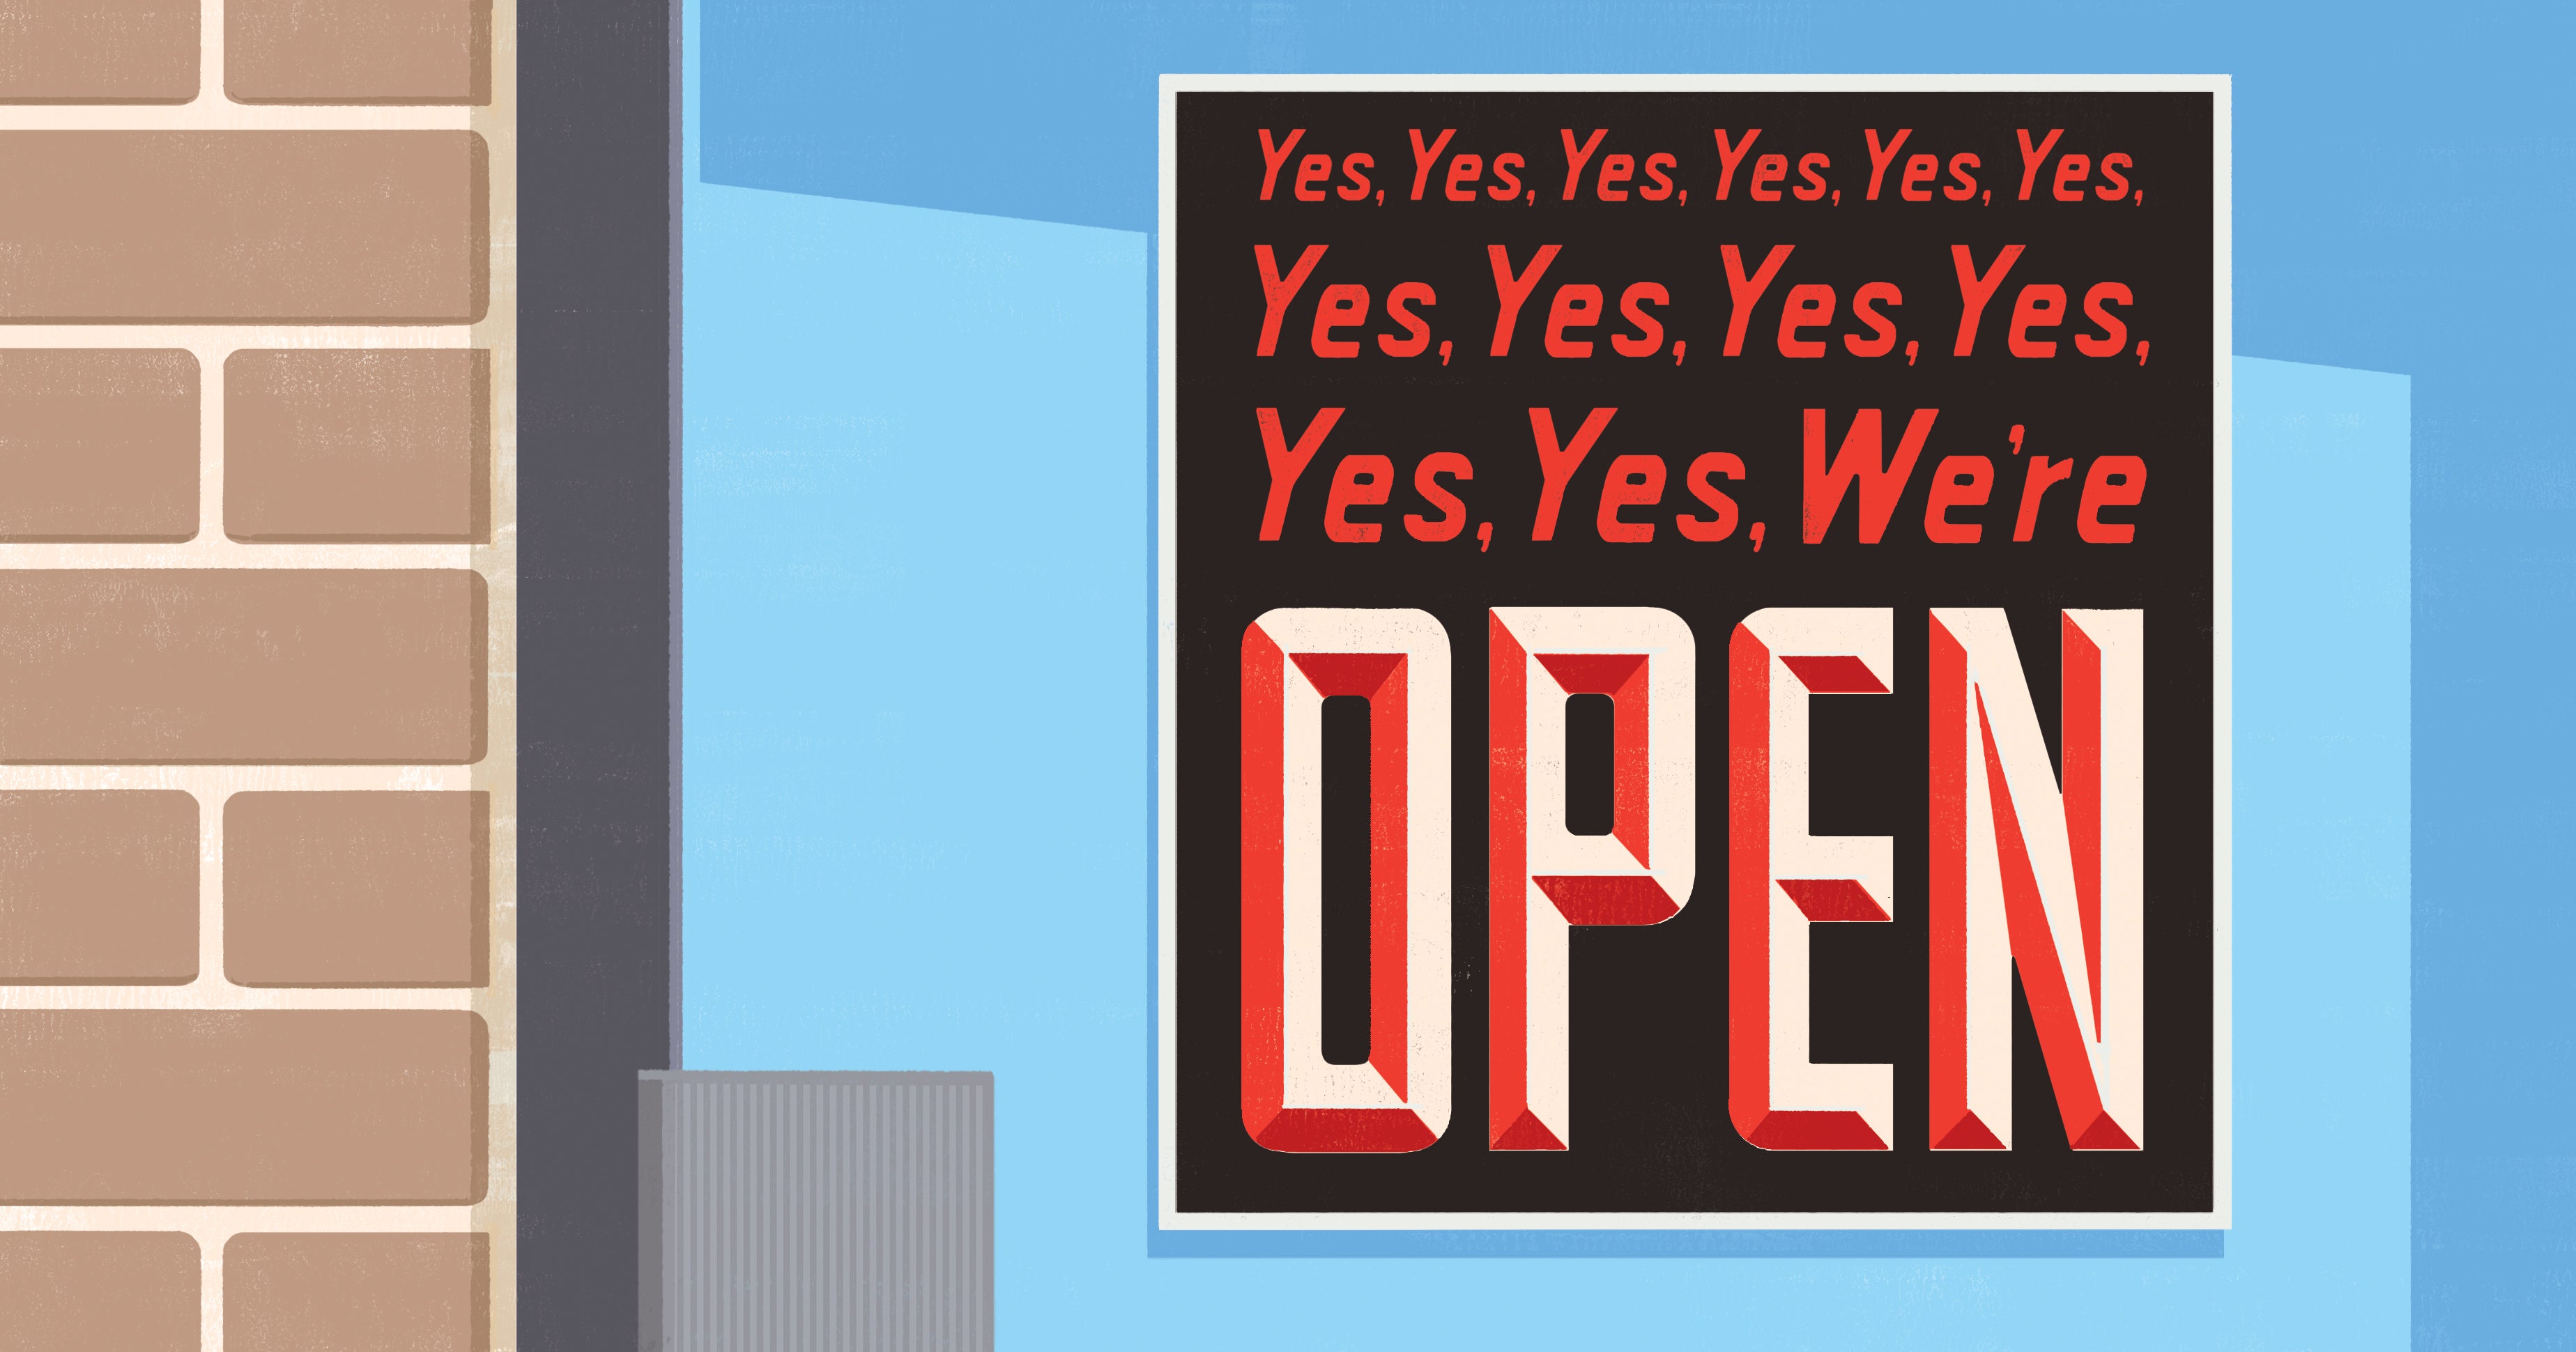 Illustration of the front window of a store. A sign posted reads "Yes yes yes yes yes yes yes yes yes yes we're open"